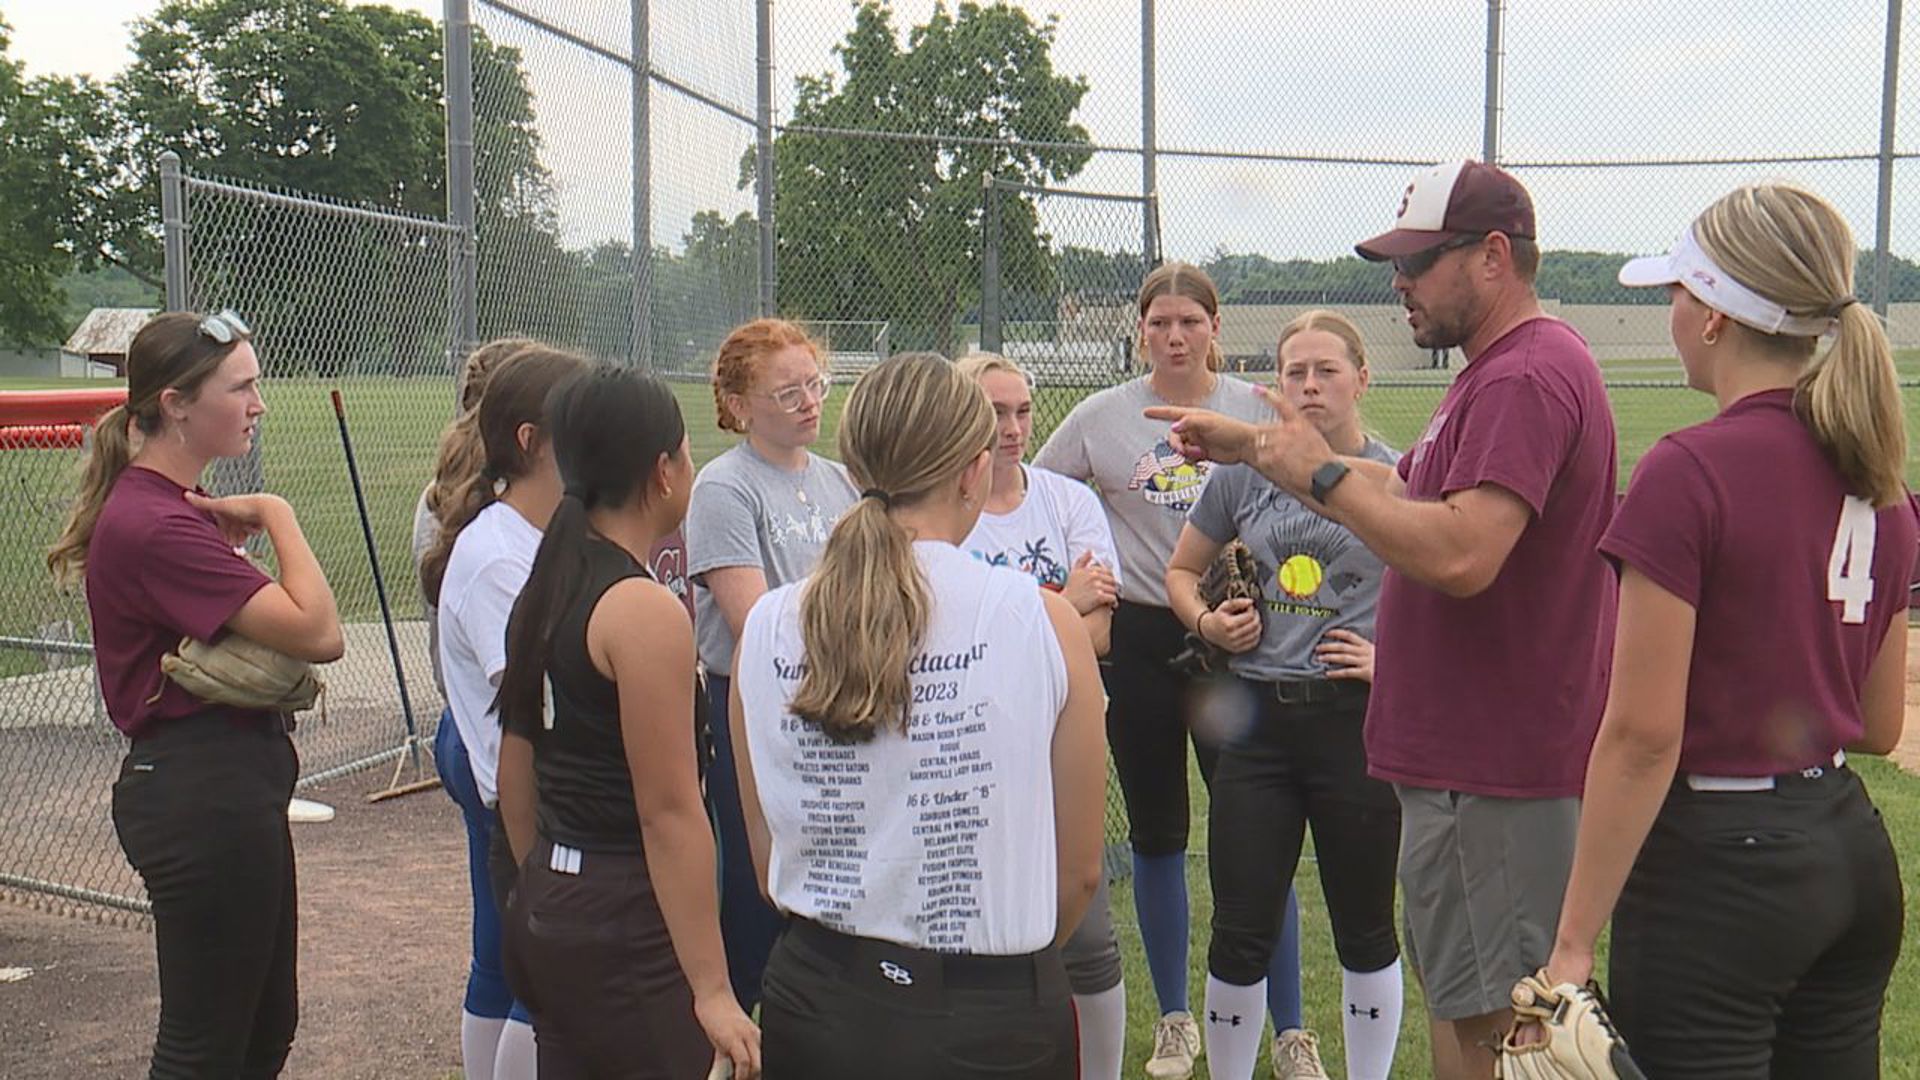 The Shippensburg softball team is in the state quarterfinals for the first time in 19 years while they honor their late coach Dustin Sheffler.